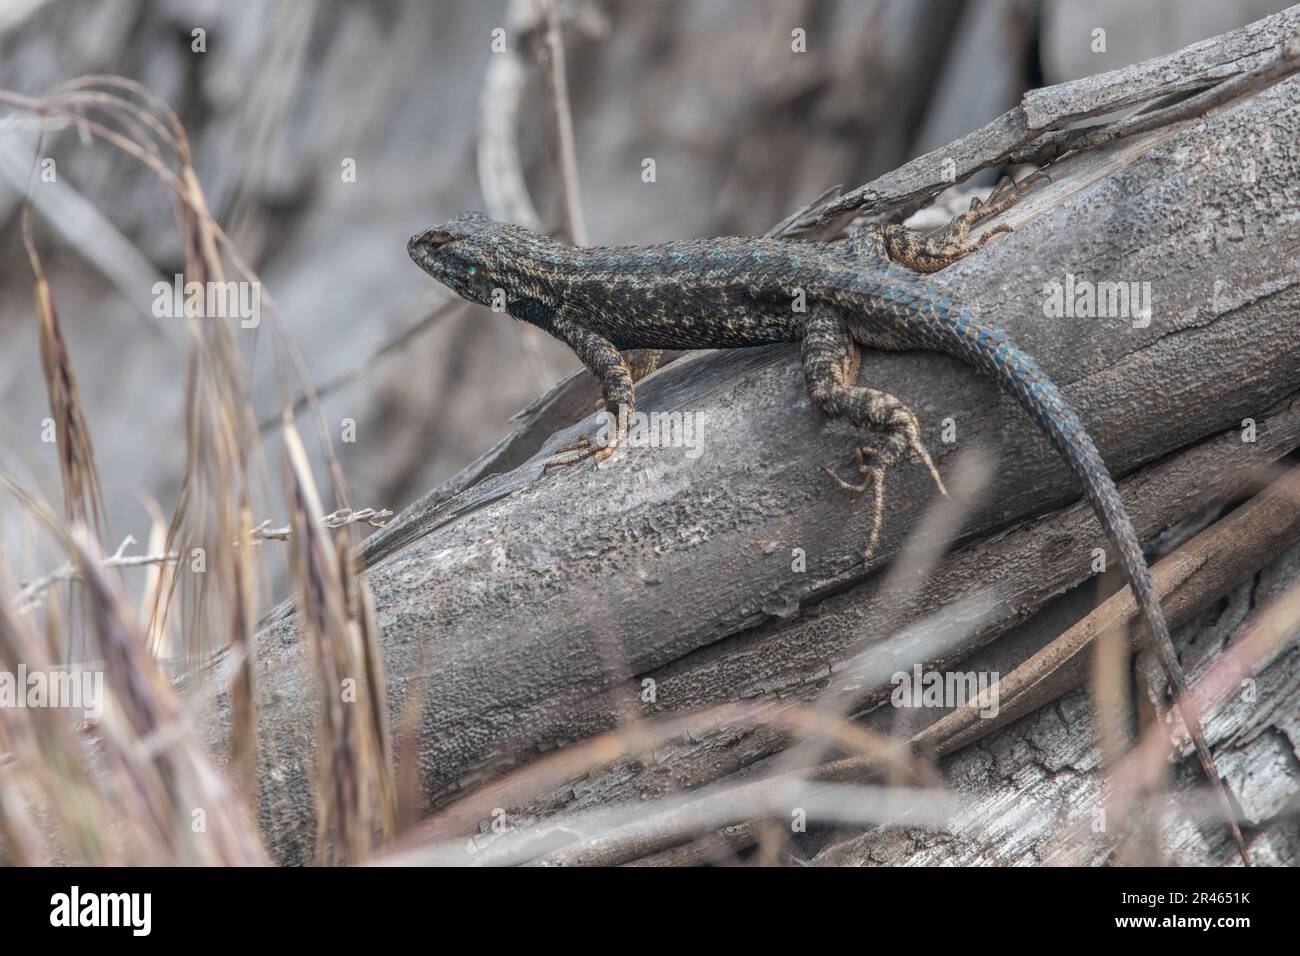 The island fence lizard, Sceloporus occidentalis becki, an endemic subspecies of reptile found on Santa Cruz island in Channel islands National Park. Stock Photo